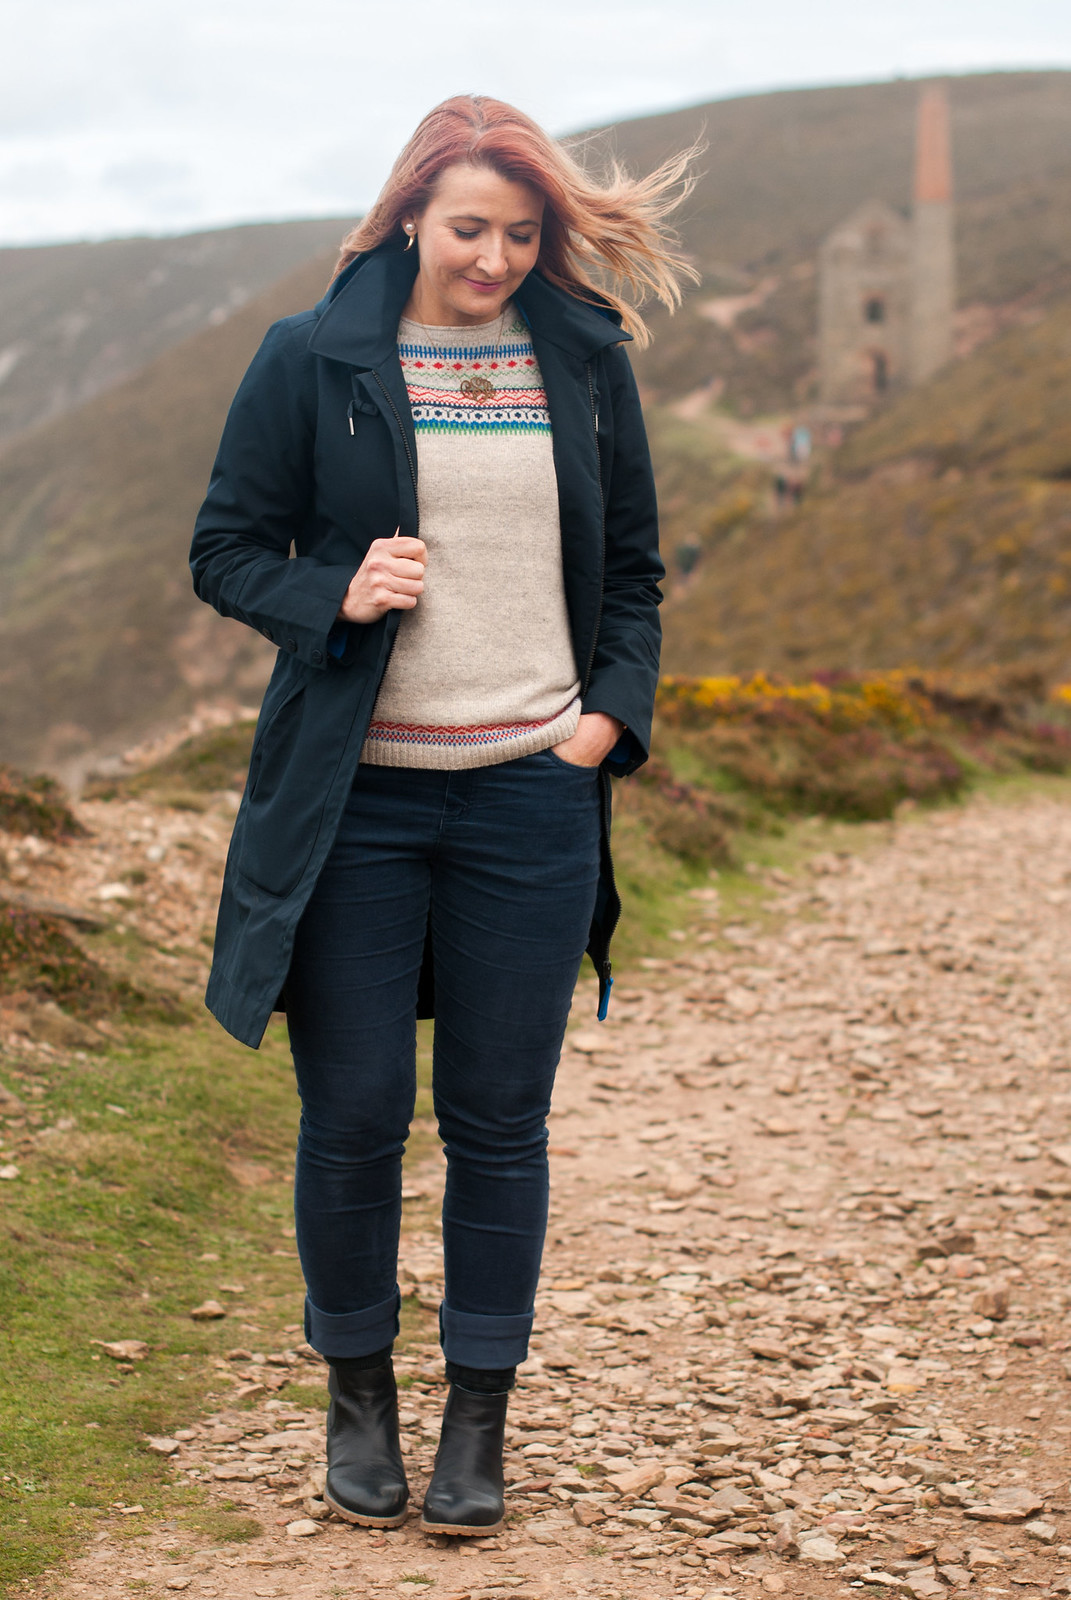 Stylish dressing for a rainy day - wearing AW17 Seasalt Cornwall in St Agnes, Cornwall: Longline navy raincoat grey Fair Isle sweater jumper blue corduroy trousers navy Chelsea boots | Not Dressed As Lamb, over 40 style